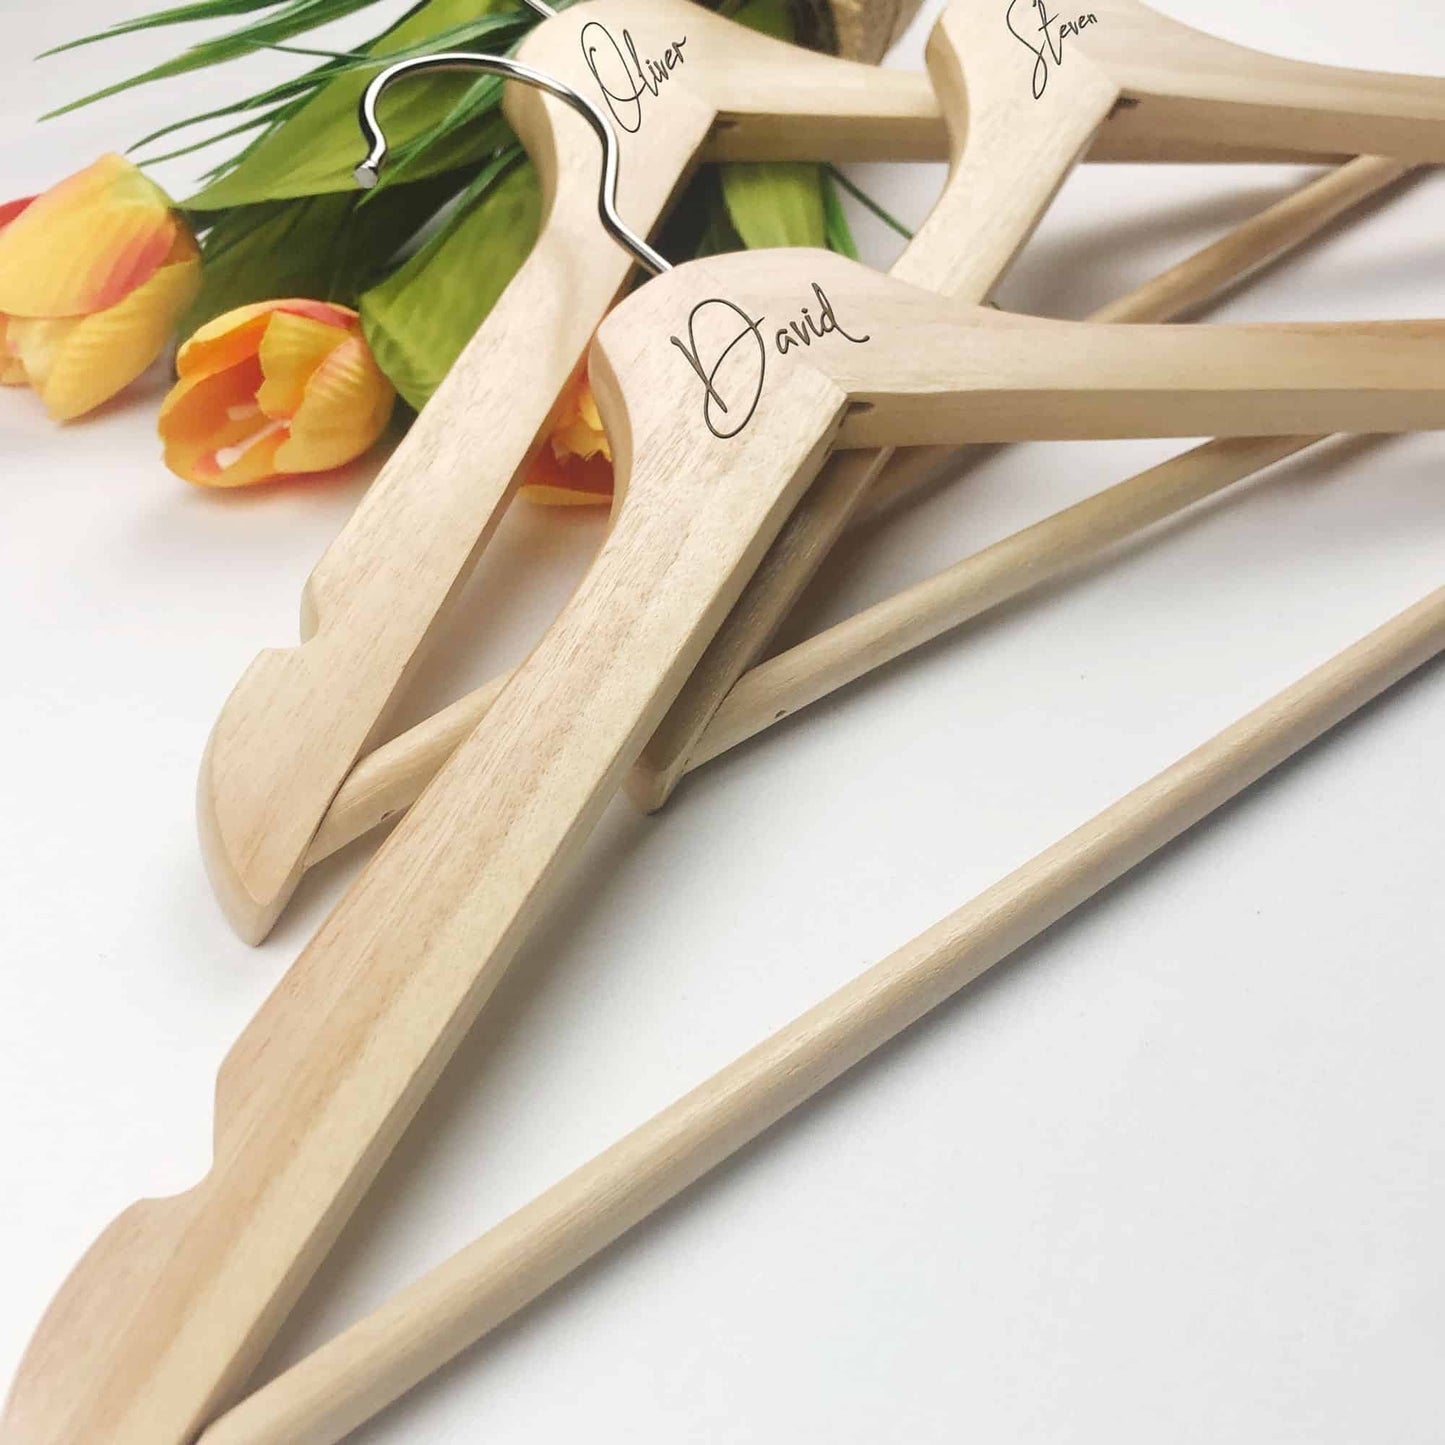 Wooden Engraved Bridal Wedding Party Dress Hanger Gifts